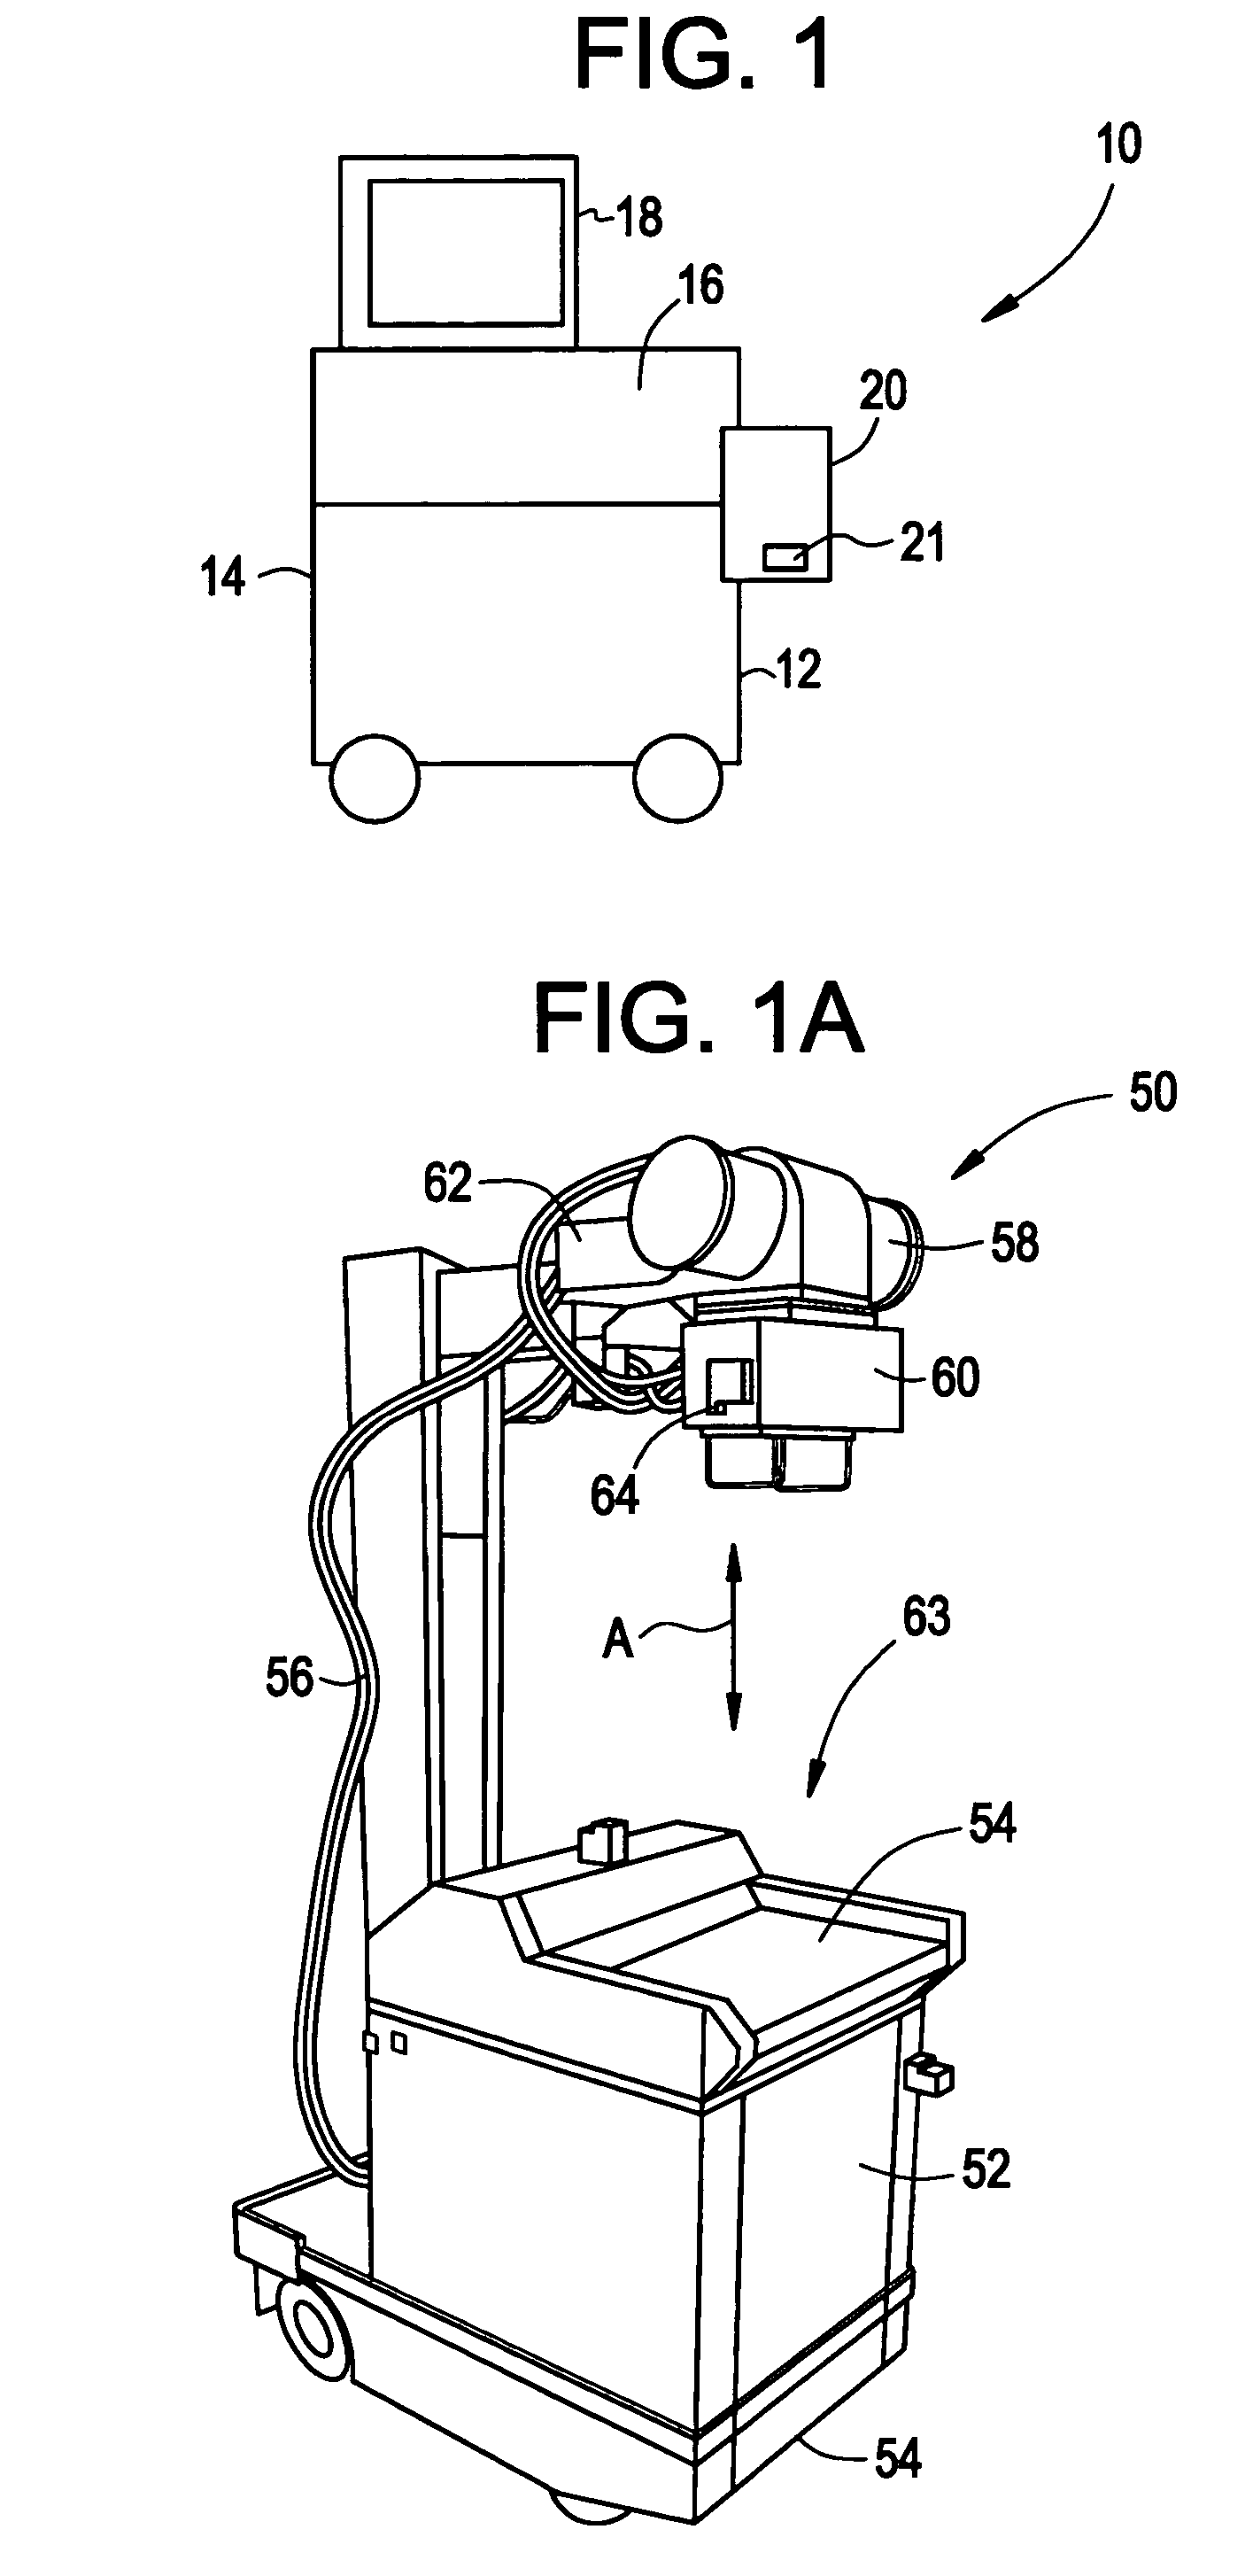 System and method for managing power deactivation within a medical imaging system